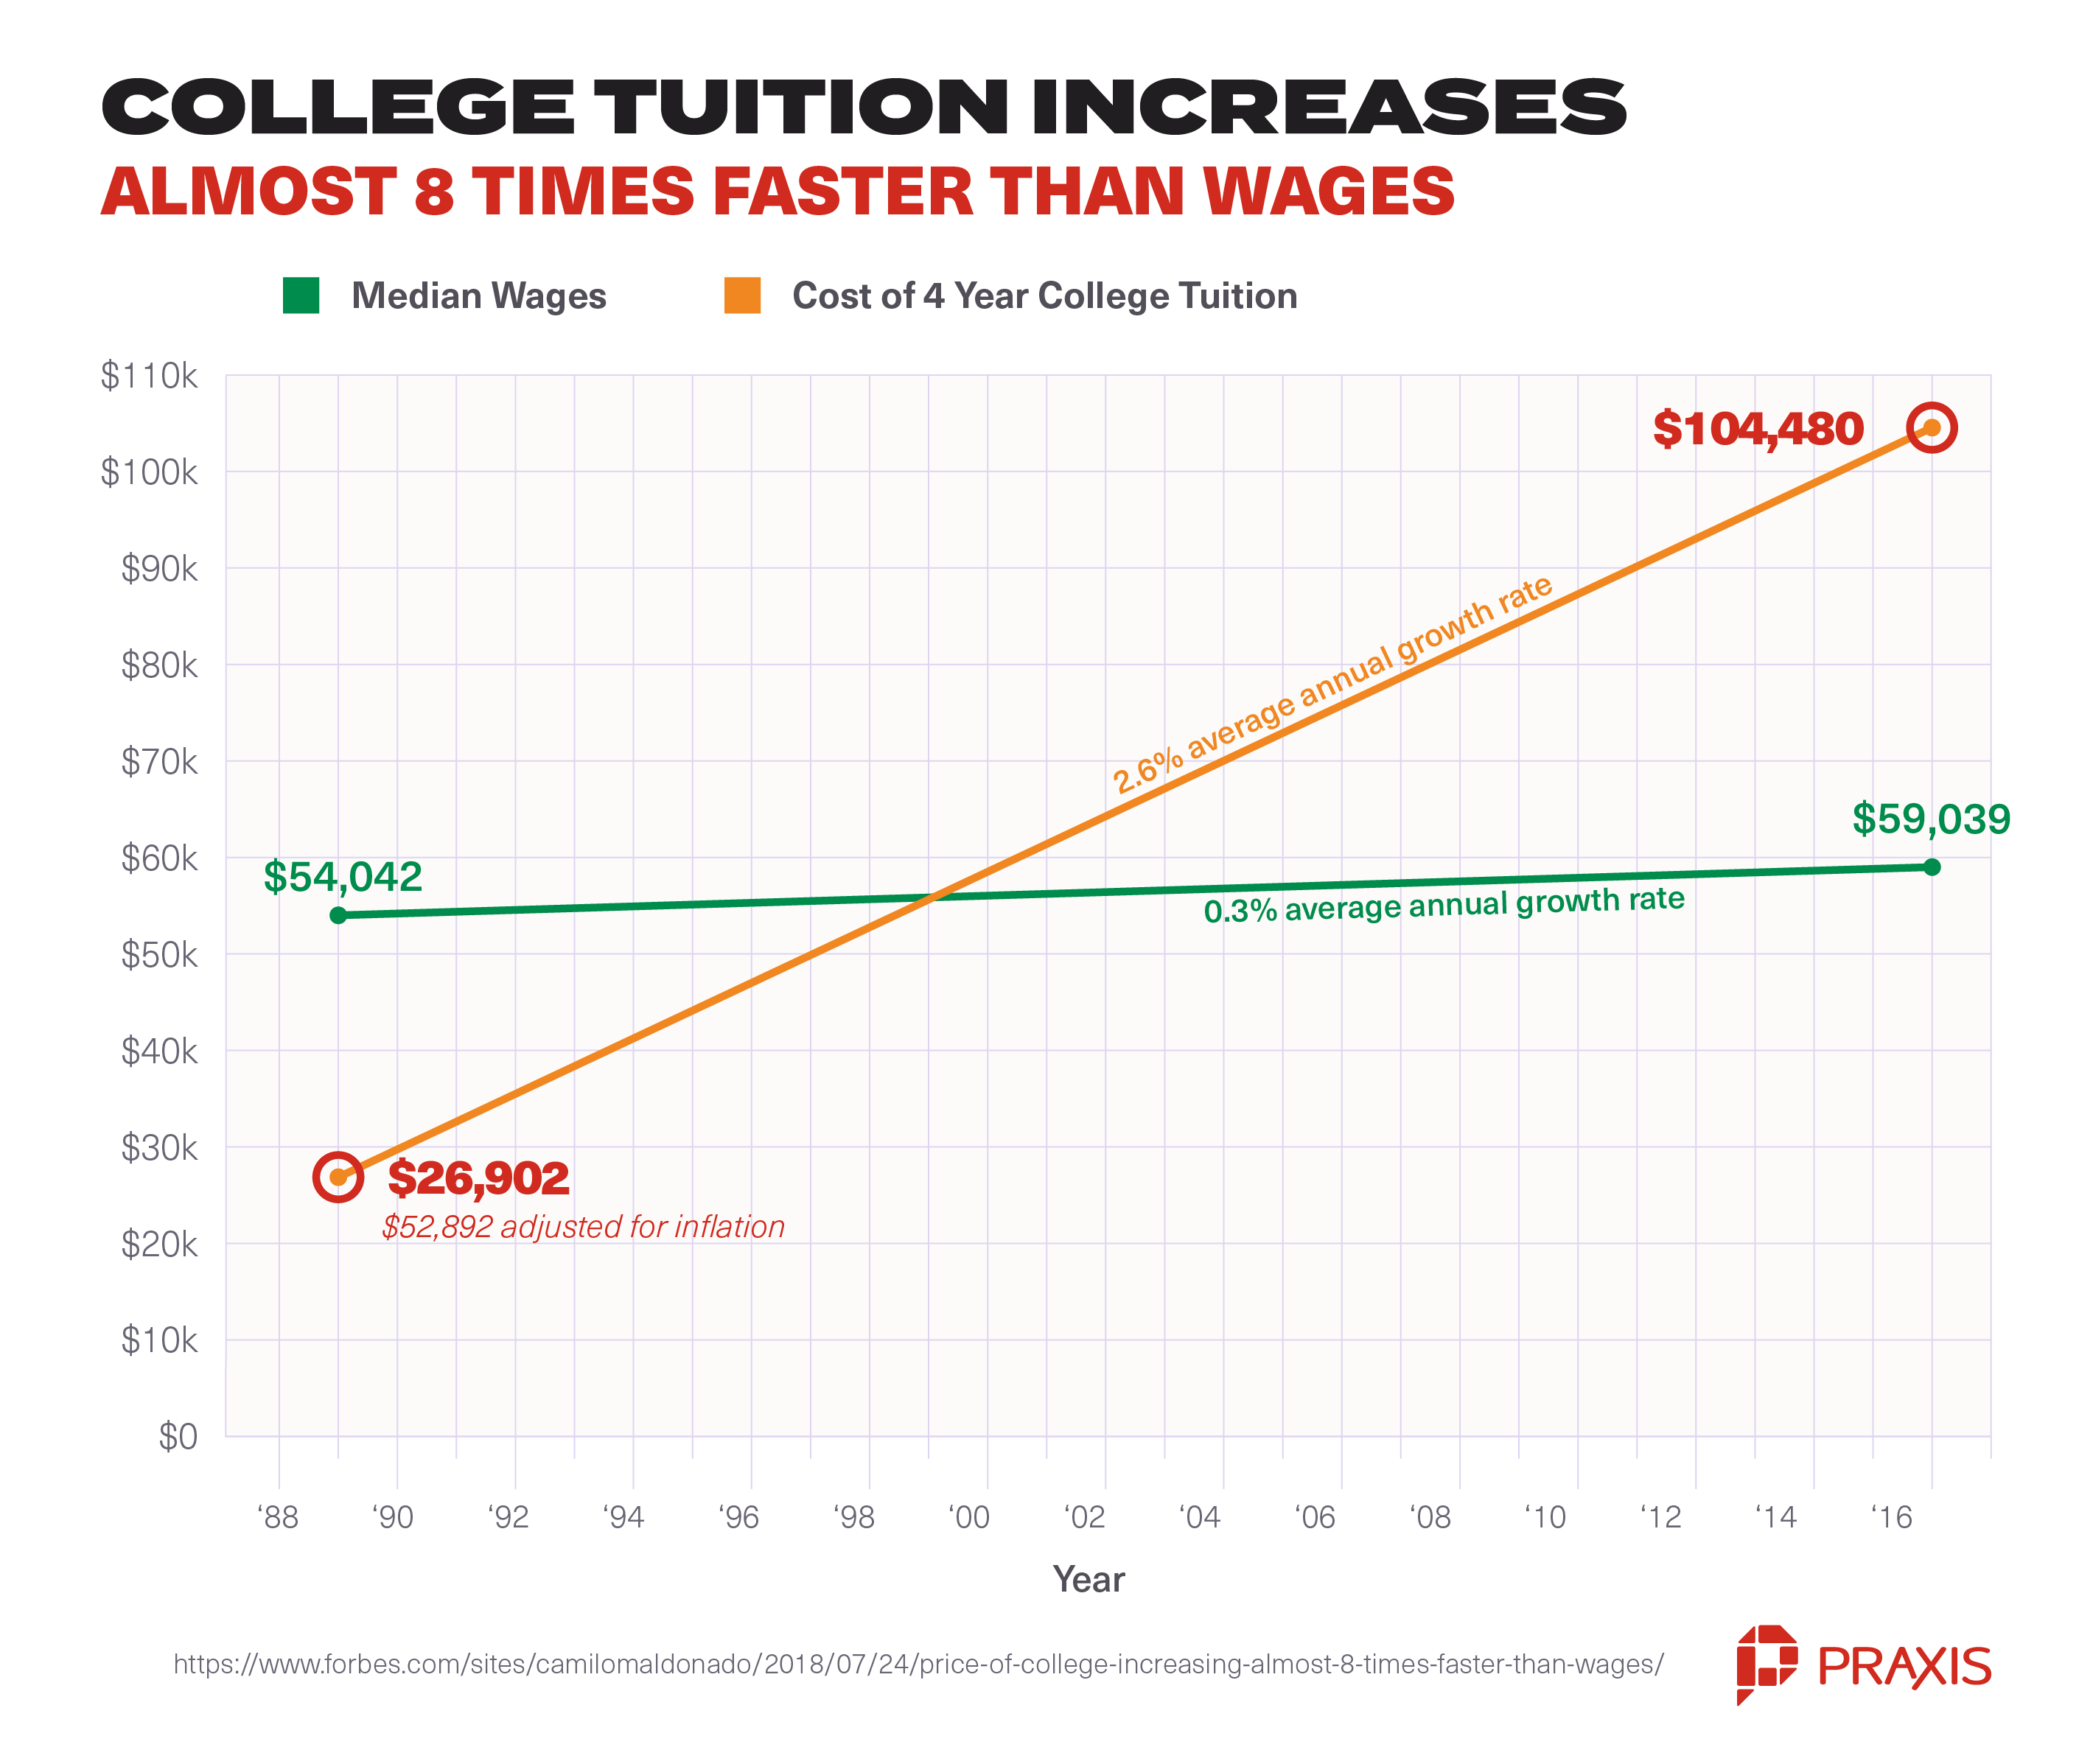 College Is Getting More Expensive Relative to Income